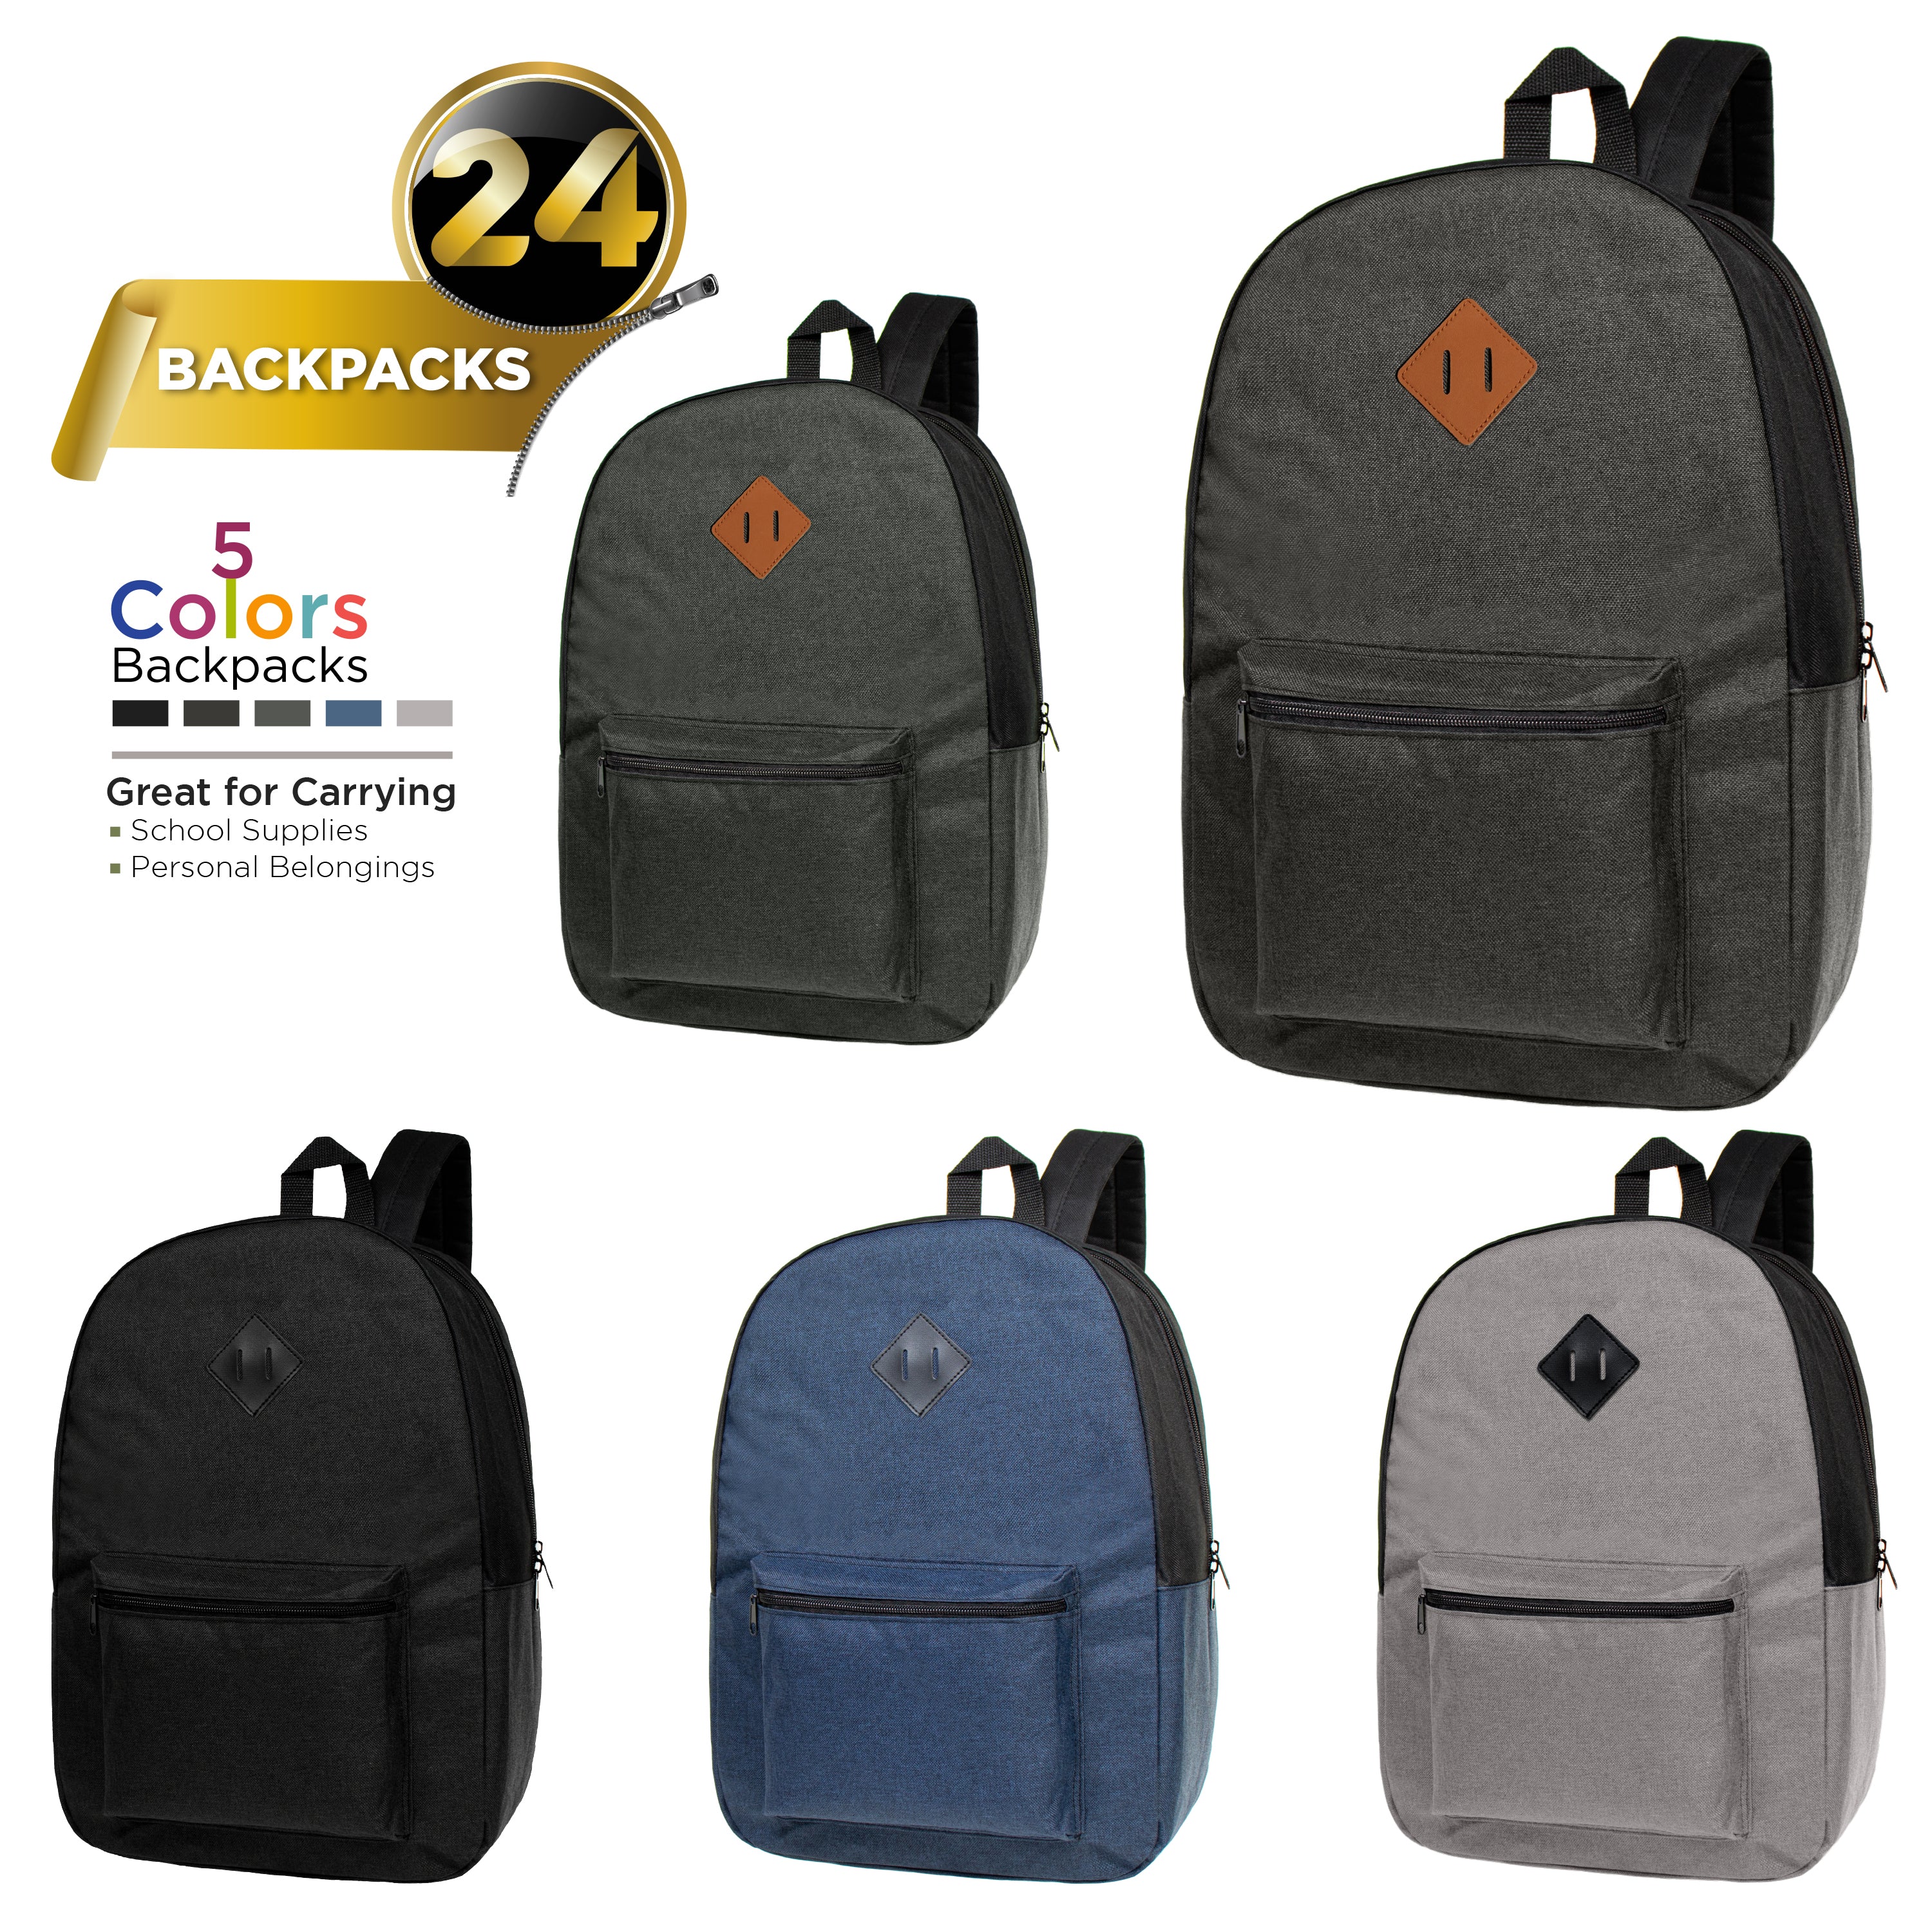 17" Kids Basic Wholesale Backpack in Assorted 5 Colors Diamond Patch - Bulk Case of 24 Backpacks